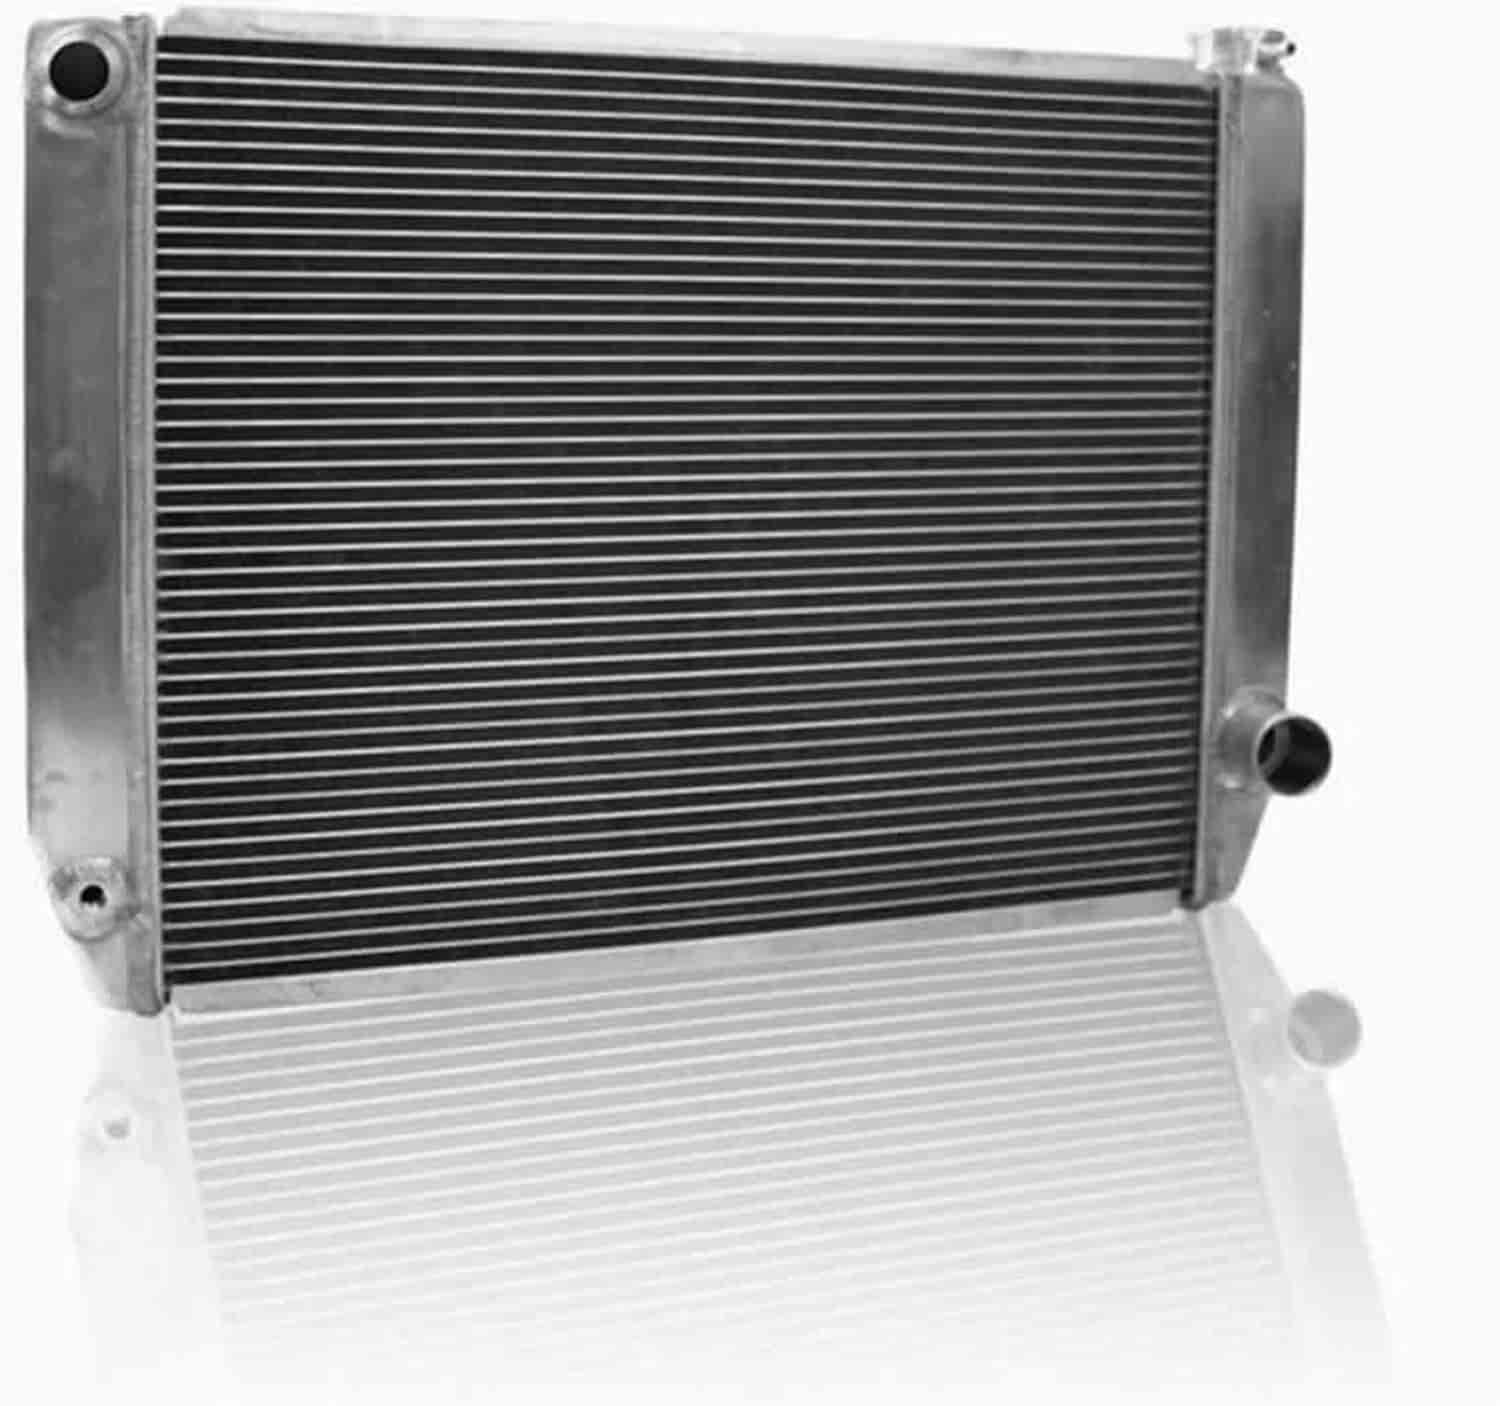 MegaCool Universal Fit Radiator Single Pass Crossflow Design 27.50" x 19" with 16AN Inlet